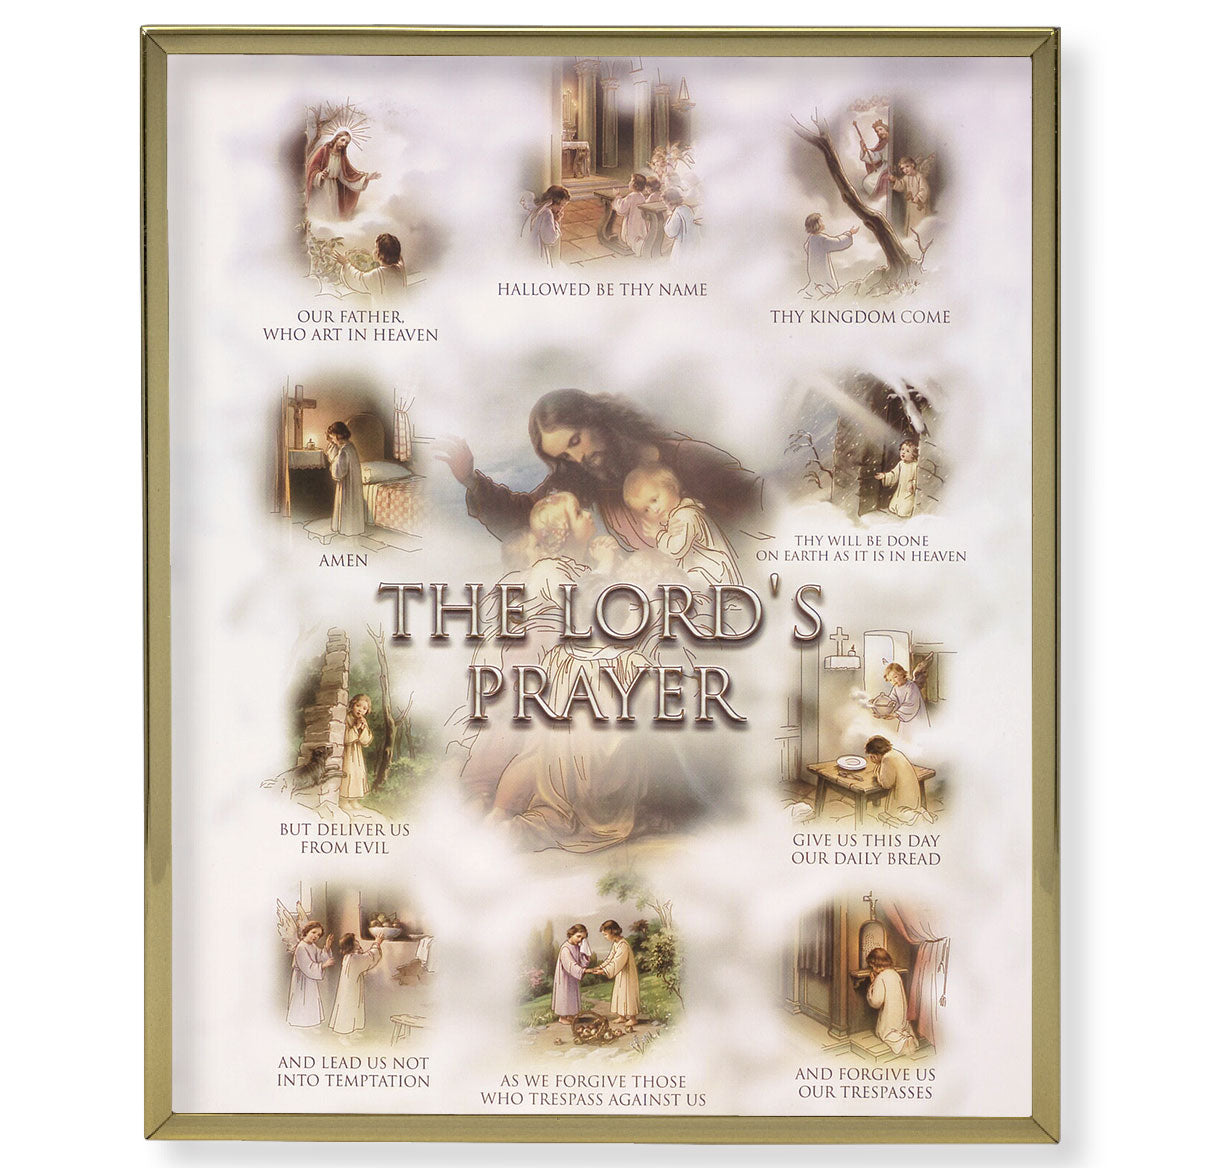 The Lord's Prayer Gold Framed Plaque Art